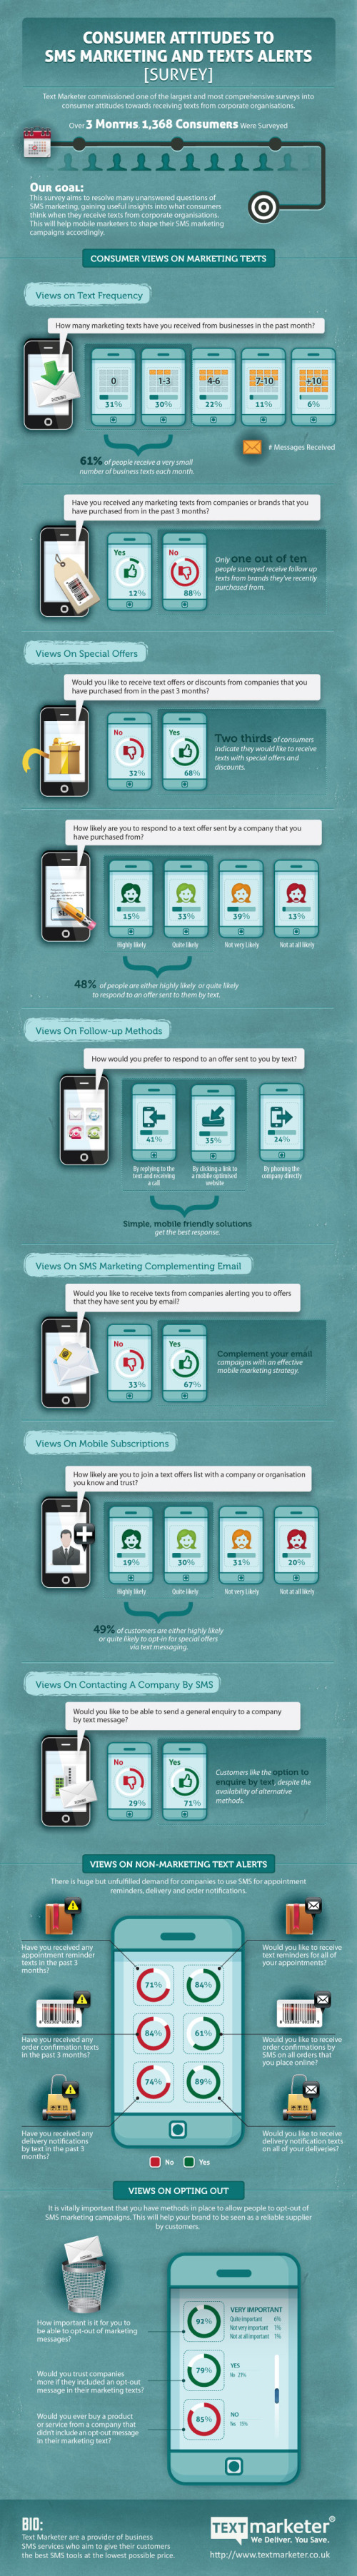 Consumer Attitudes to SMS Marketing and Texts Alerts infographic